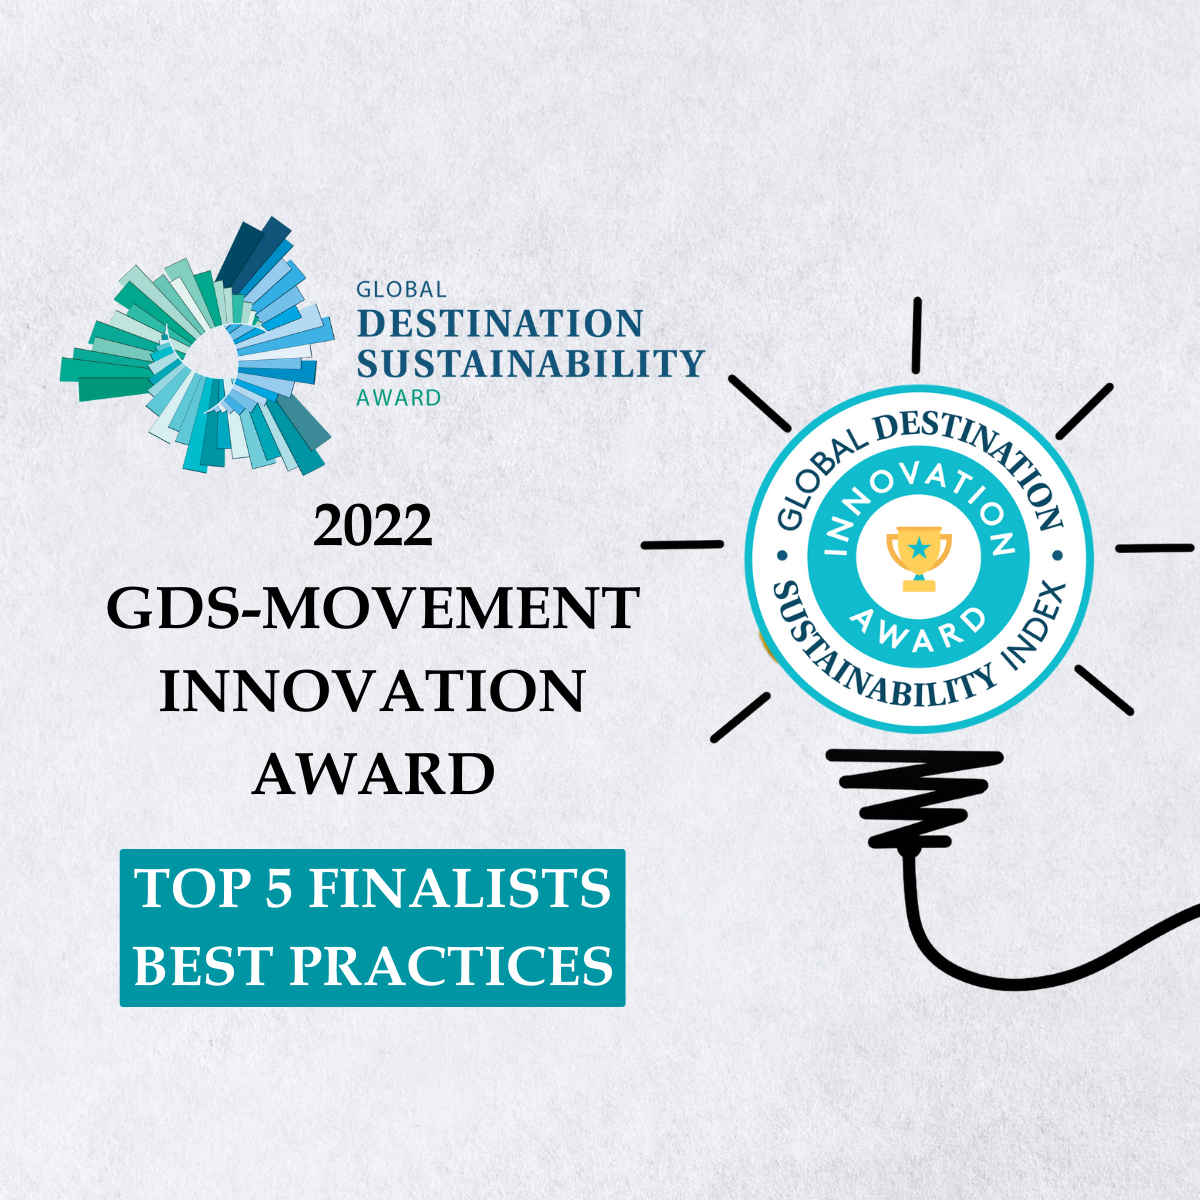 Eye-opening projects from the 2022 GDS-Movement Innovation Award’s Top 5 Finalists